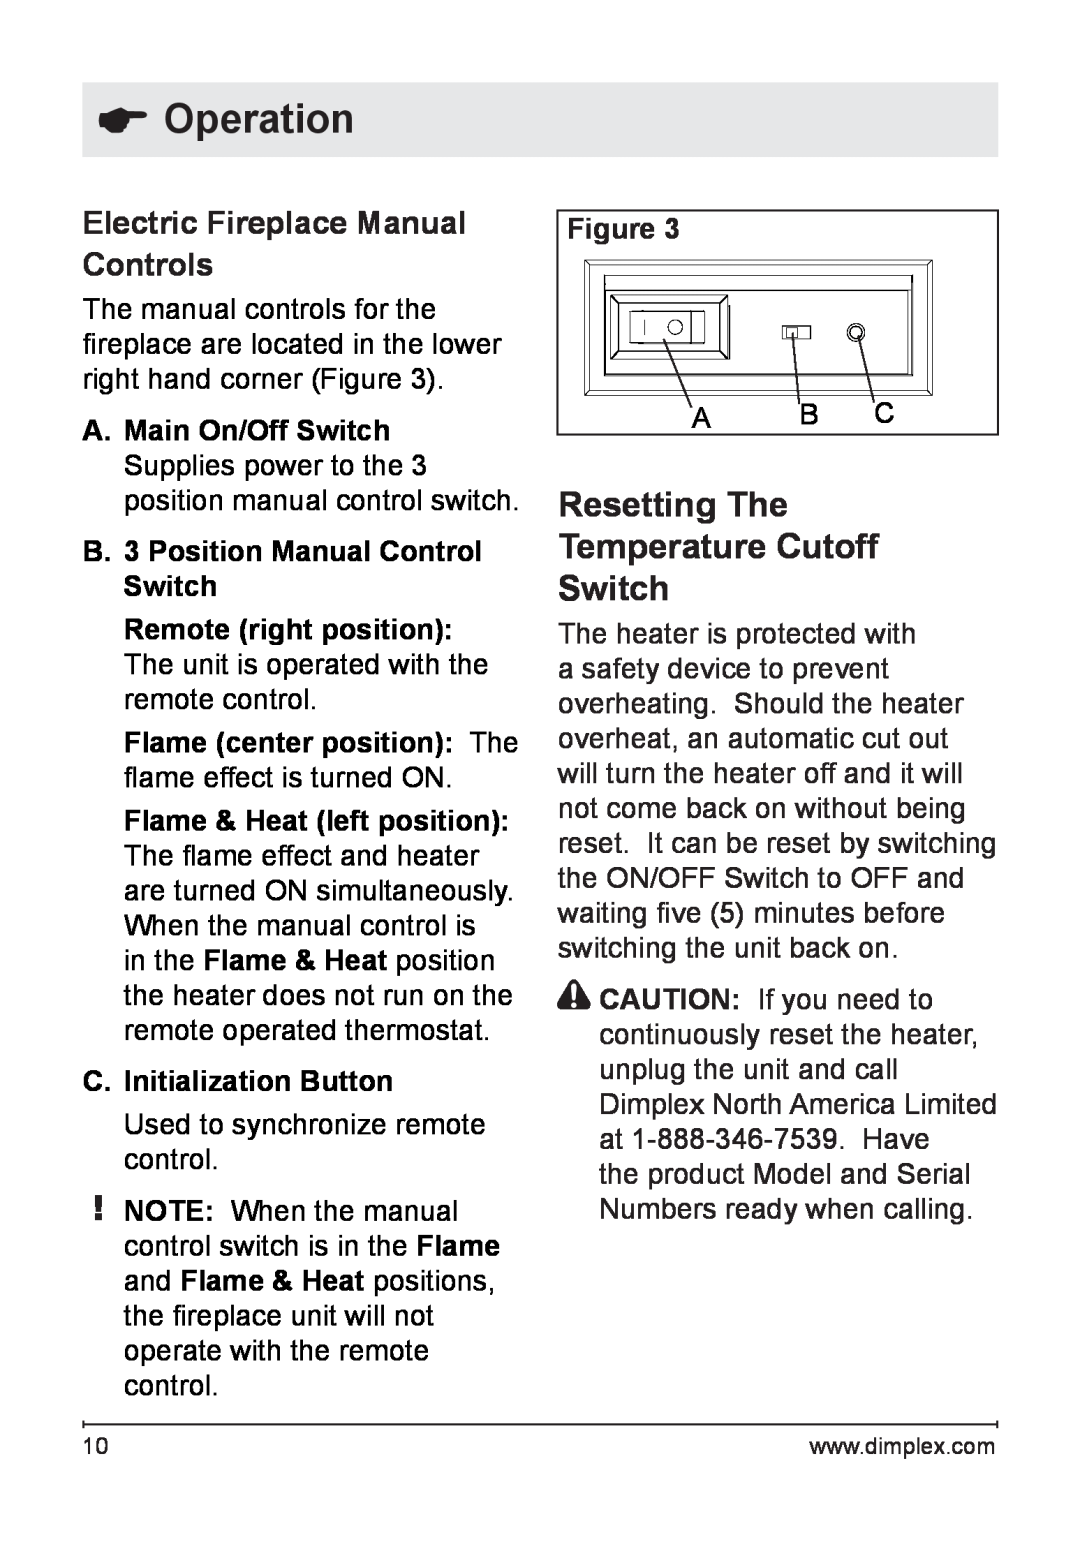 Dimplex DFB8842 owner manual Operation, Resetting The Temperature Cutoff Switch, Electric Fireplace Manual Controls 